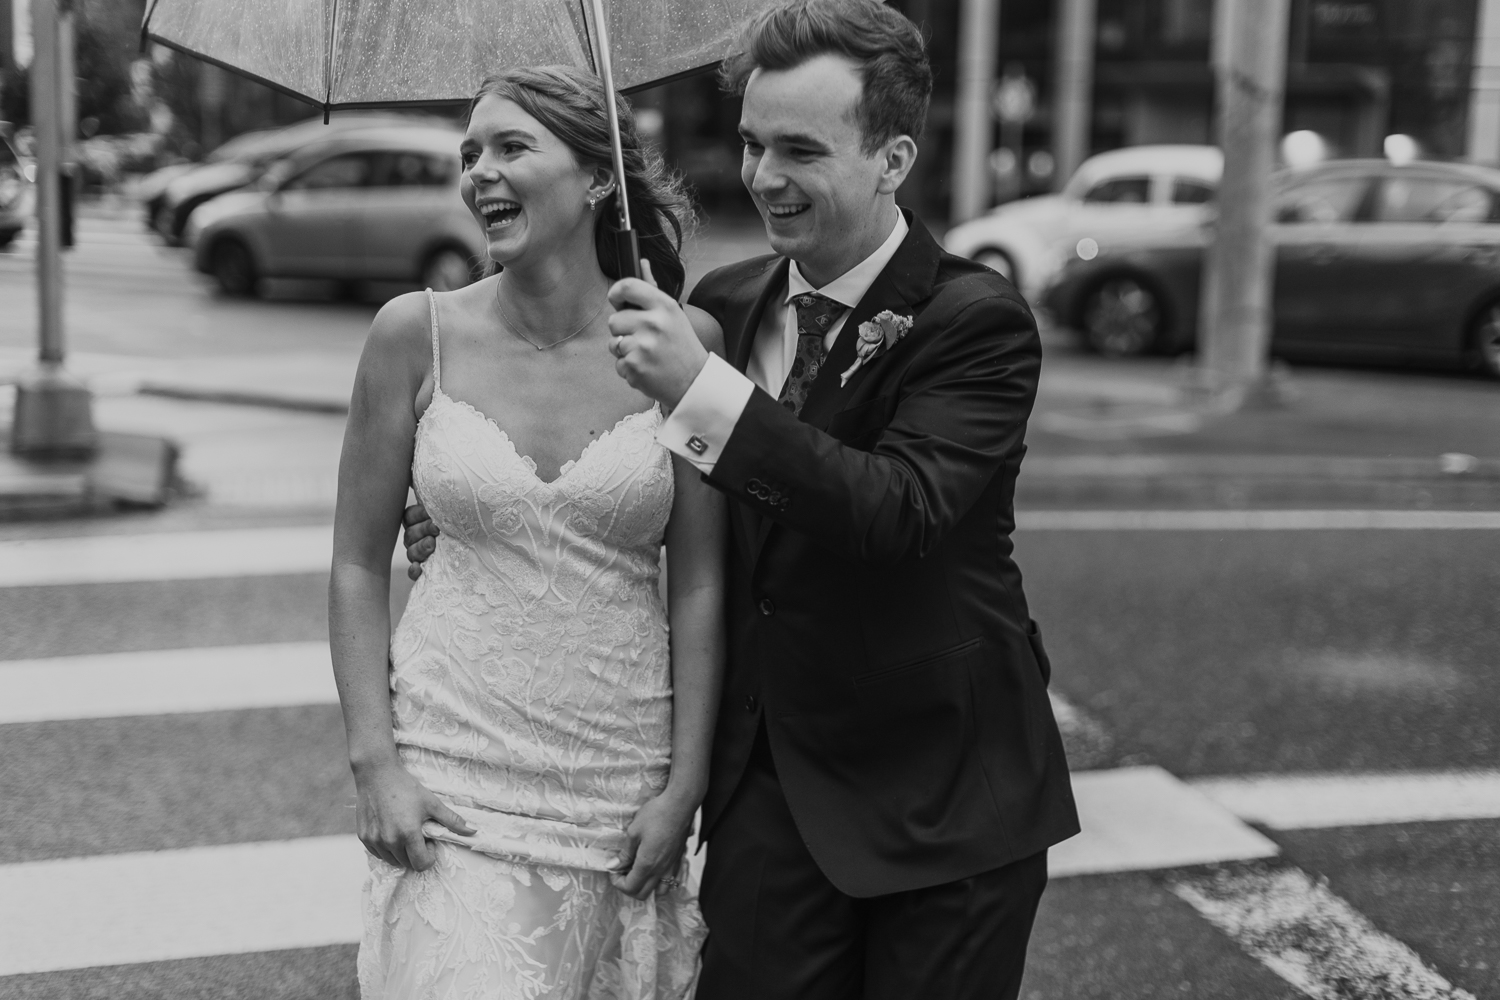 Couple Crossing the street. Taken by Portland Wedding Photographer Nate Meeds